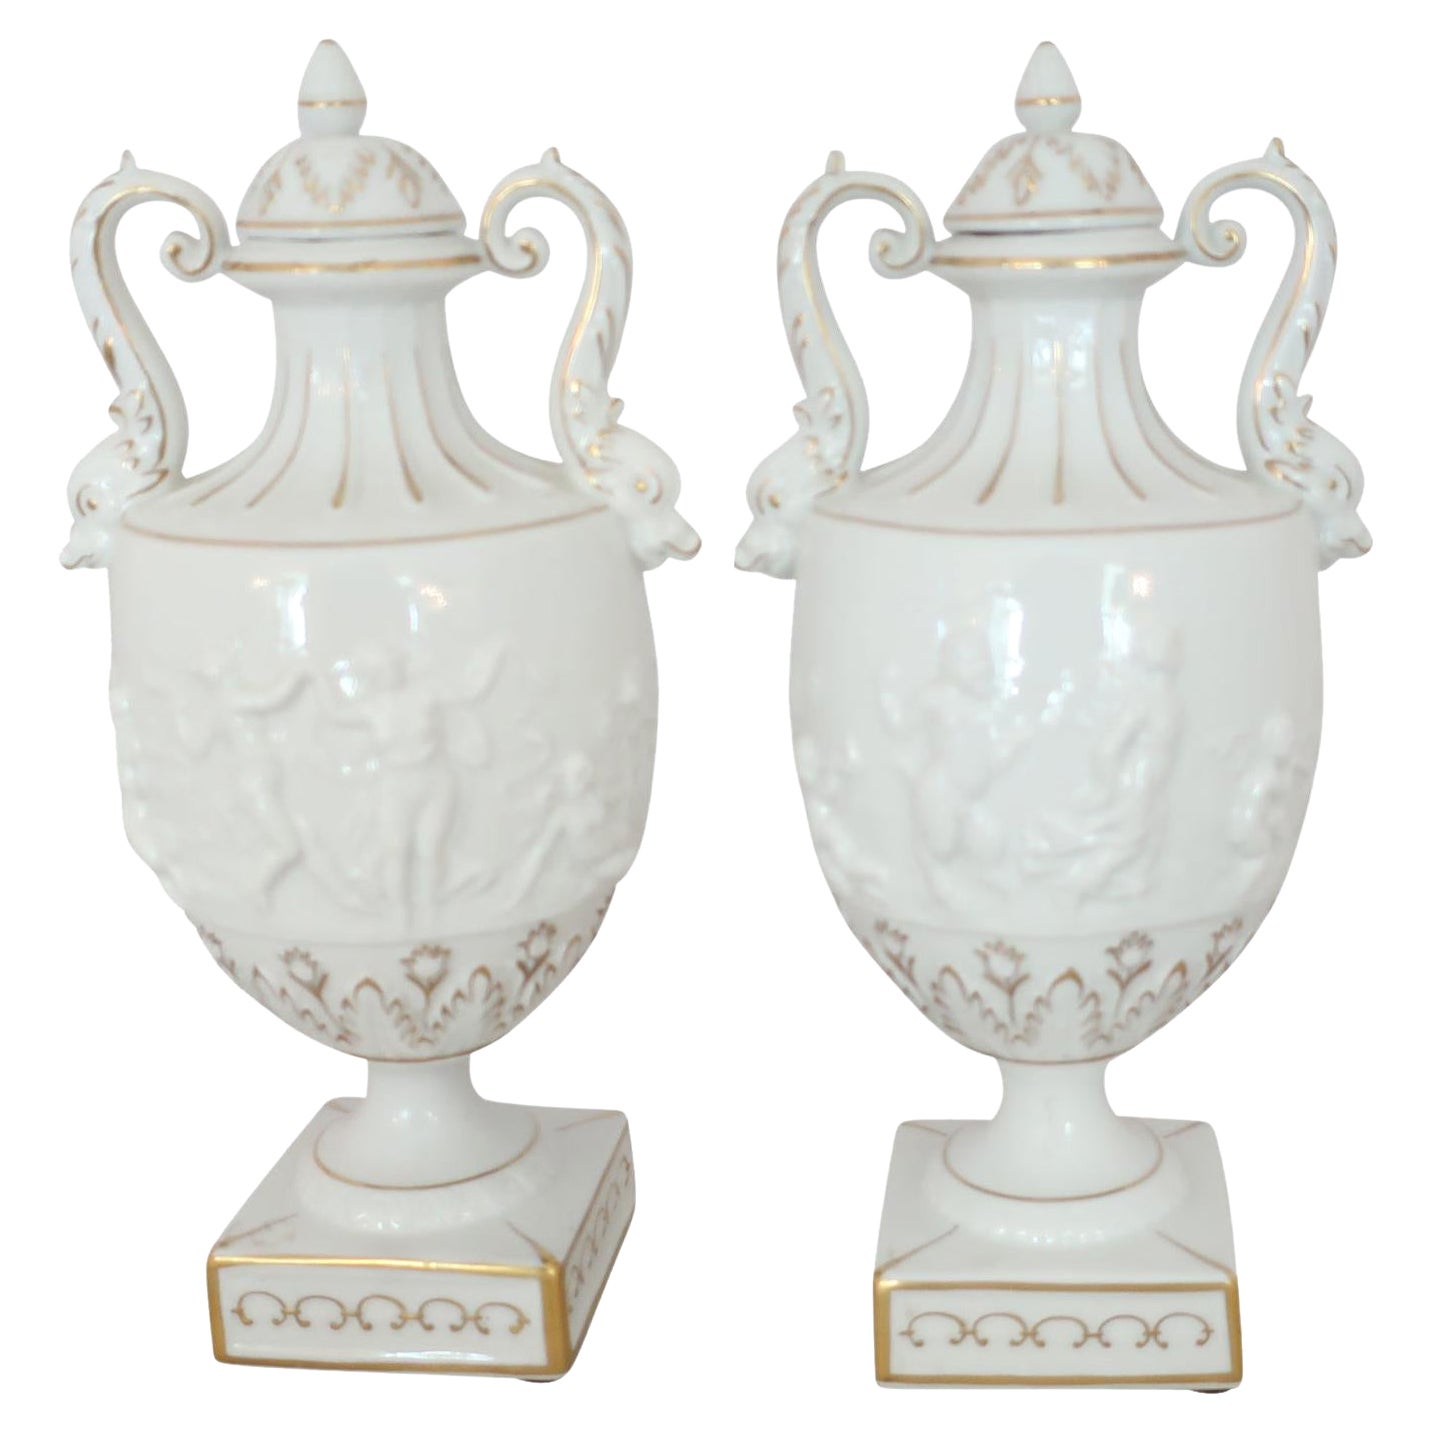 White and Gilt Capodimonte Porcelain Urns with Lids and Putti Decoration For Sale